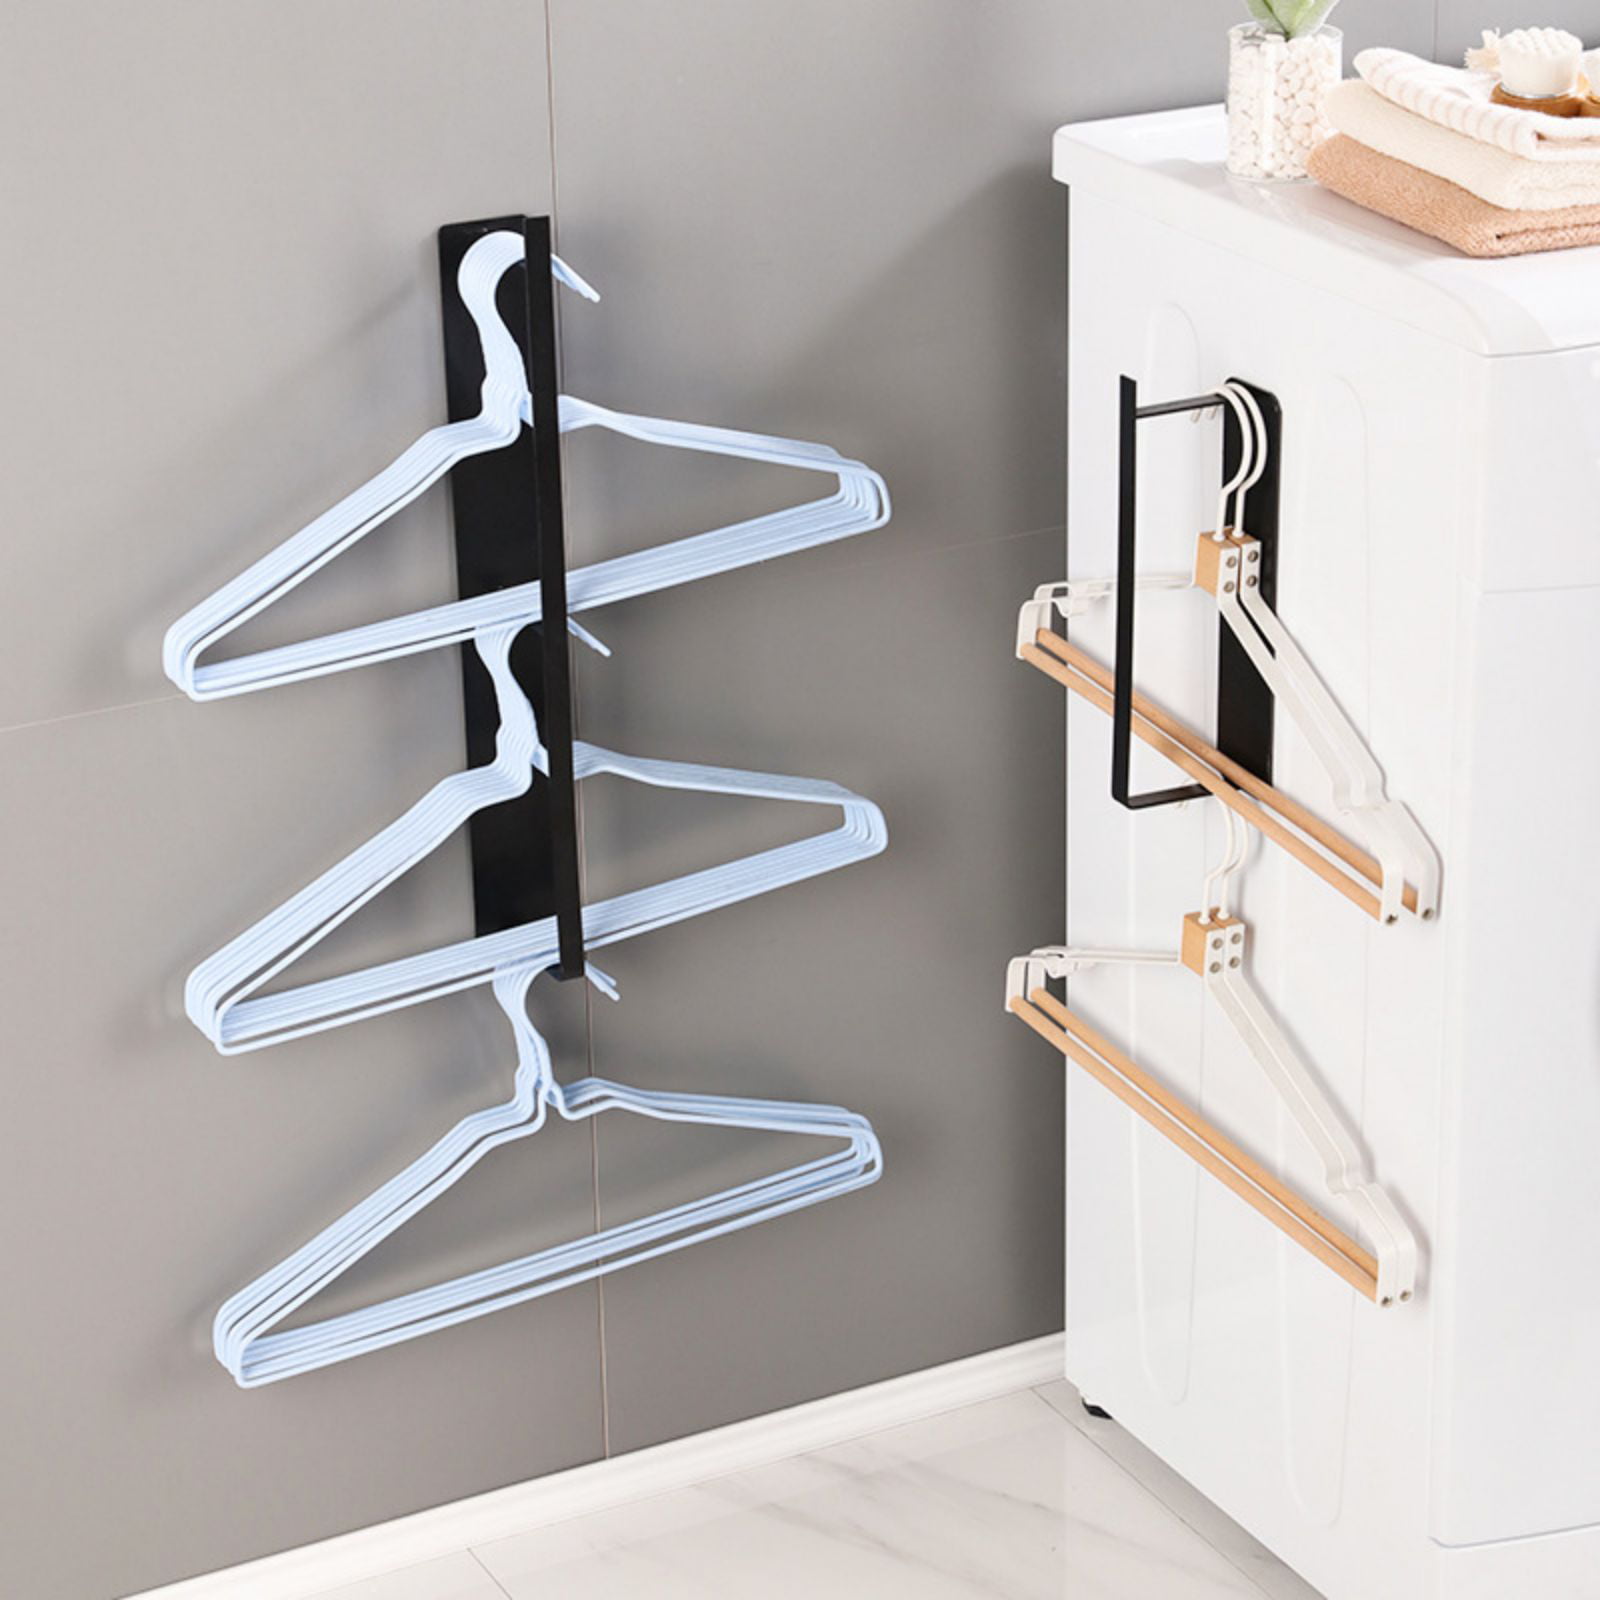 HAKDAY Hanger Storage Rack, Portable Hanger Organizer Rack, Hanger Stacker  Hanger Storage Holder Hanger Caddy for Closet Laundry Dry Cleaning Room